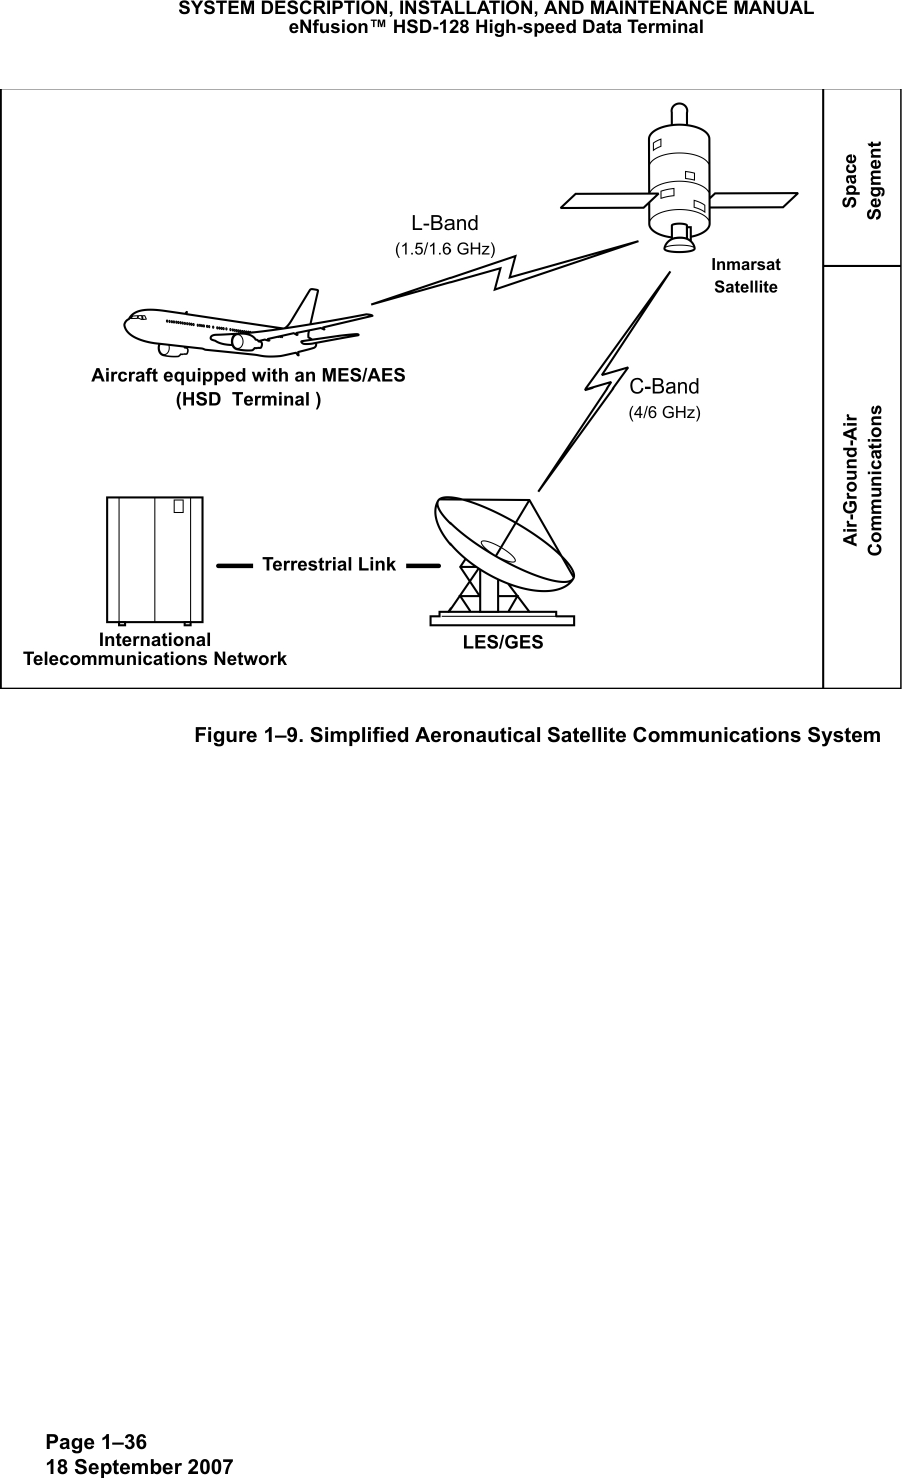 Page 1–3618 September 2007SYSTEM DESCRIPTION, INSTALLATION, AND MAINTENANCE MANUALeNfusion™ HSD-128 High-speed Data TerminalFigure 1–9. Simplified Aeronautical Satellite Communications System 